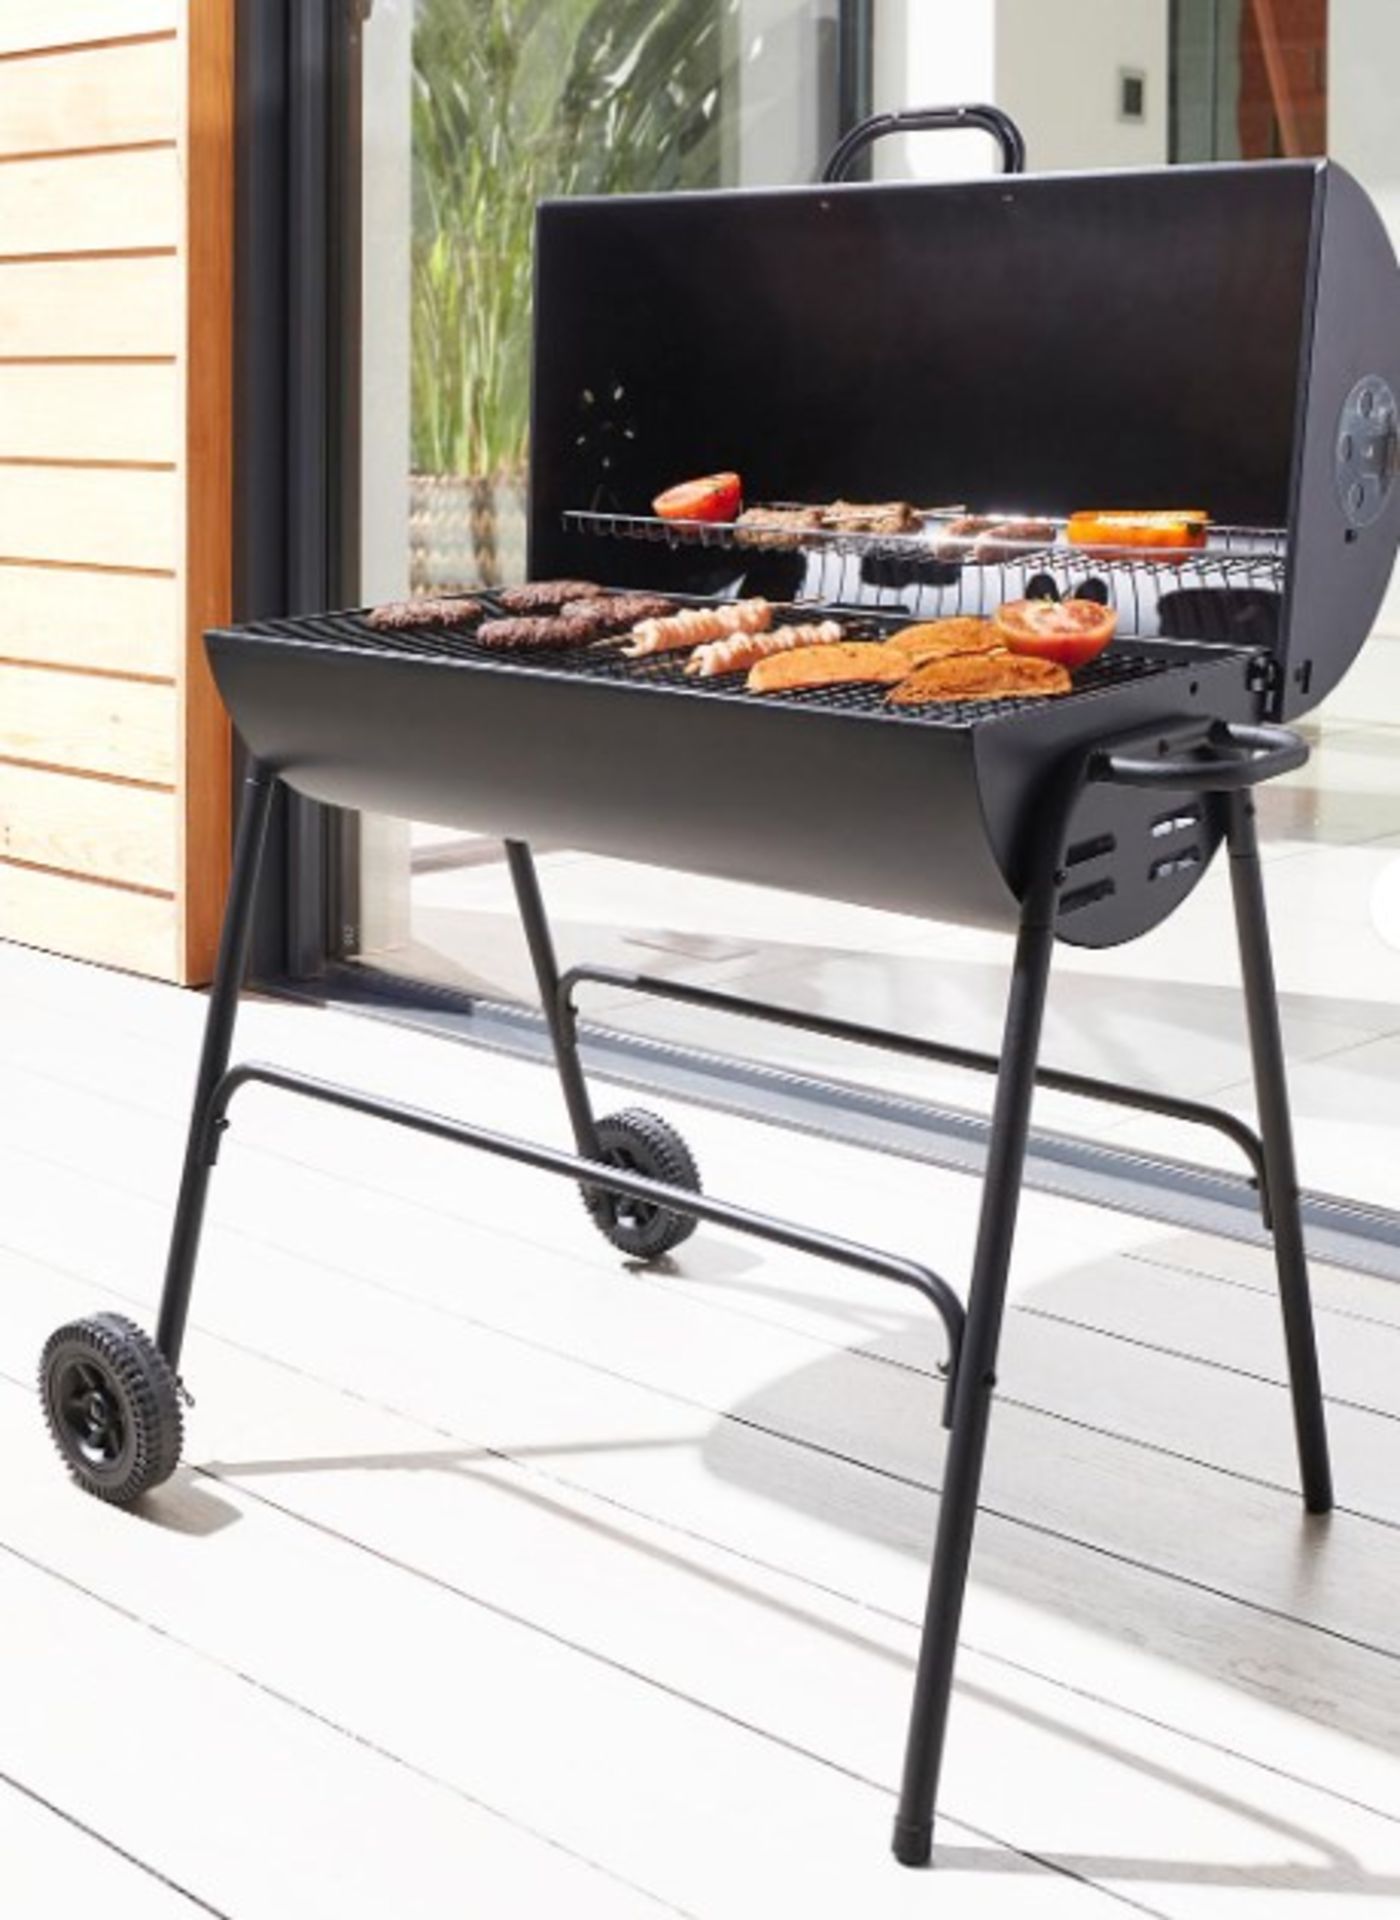 RRP £89.99 - Oil Drum Charcoal BBQ Grill Outdoor Garden Patio Cooking Black